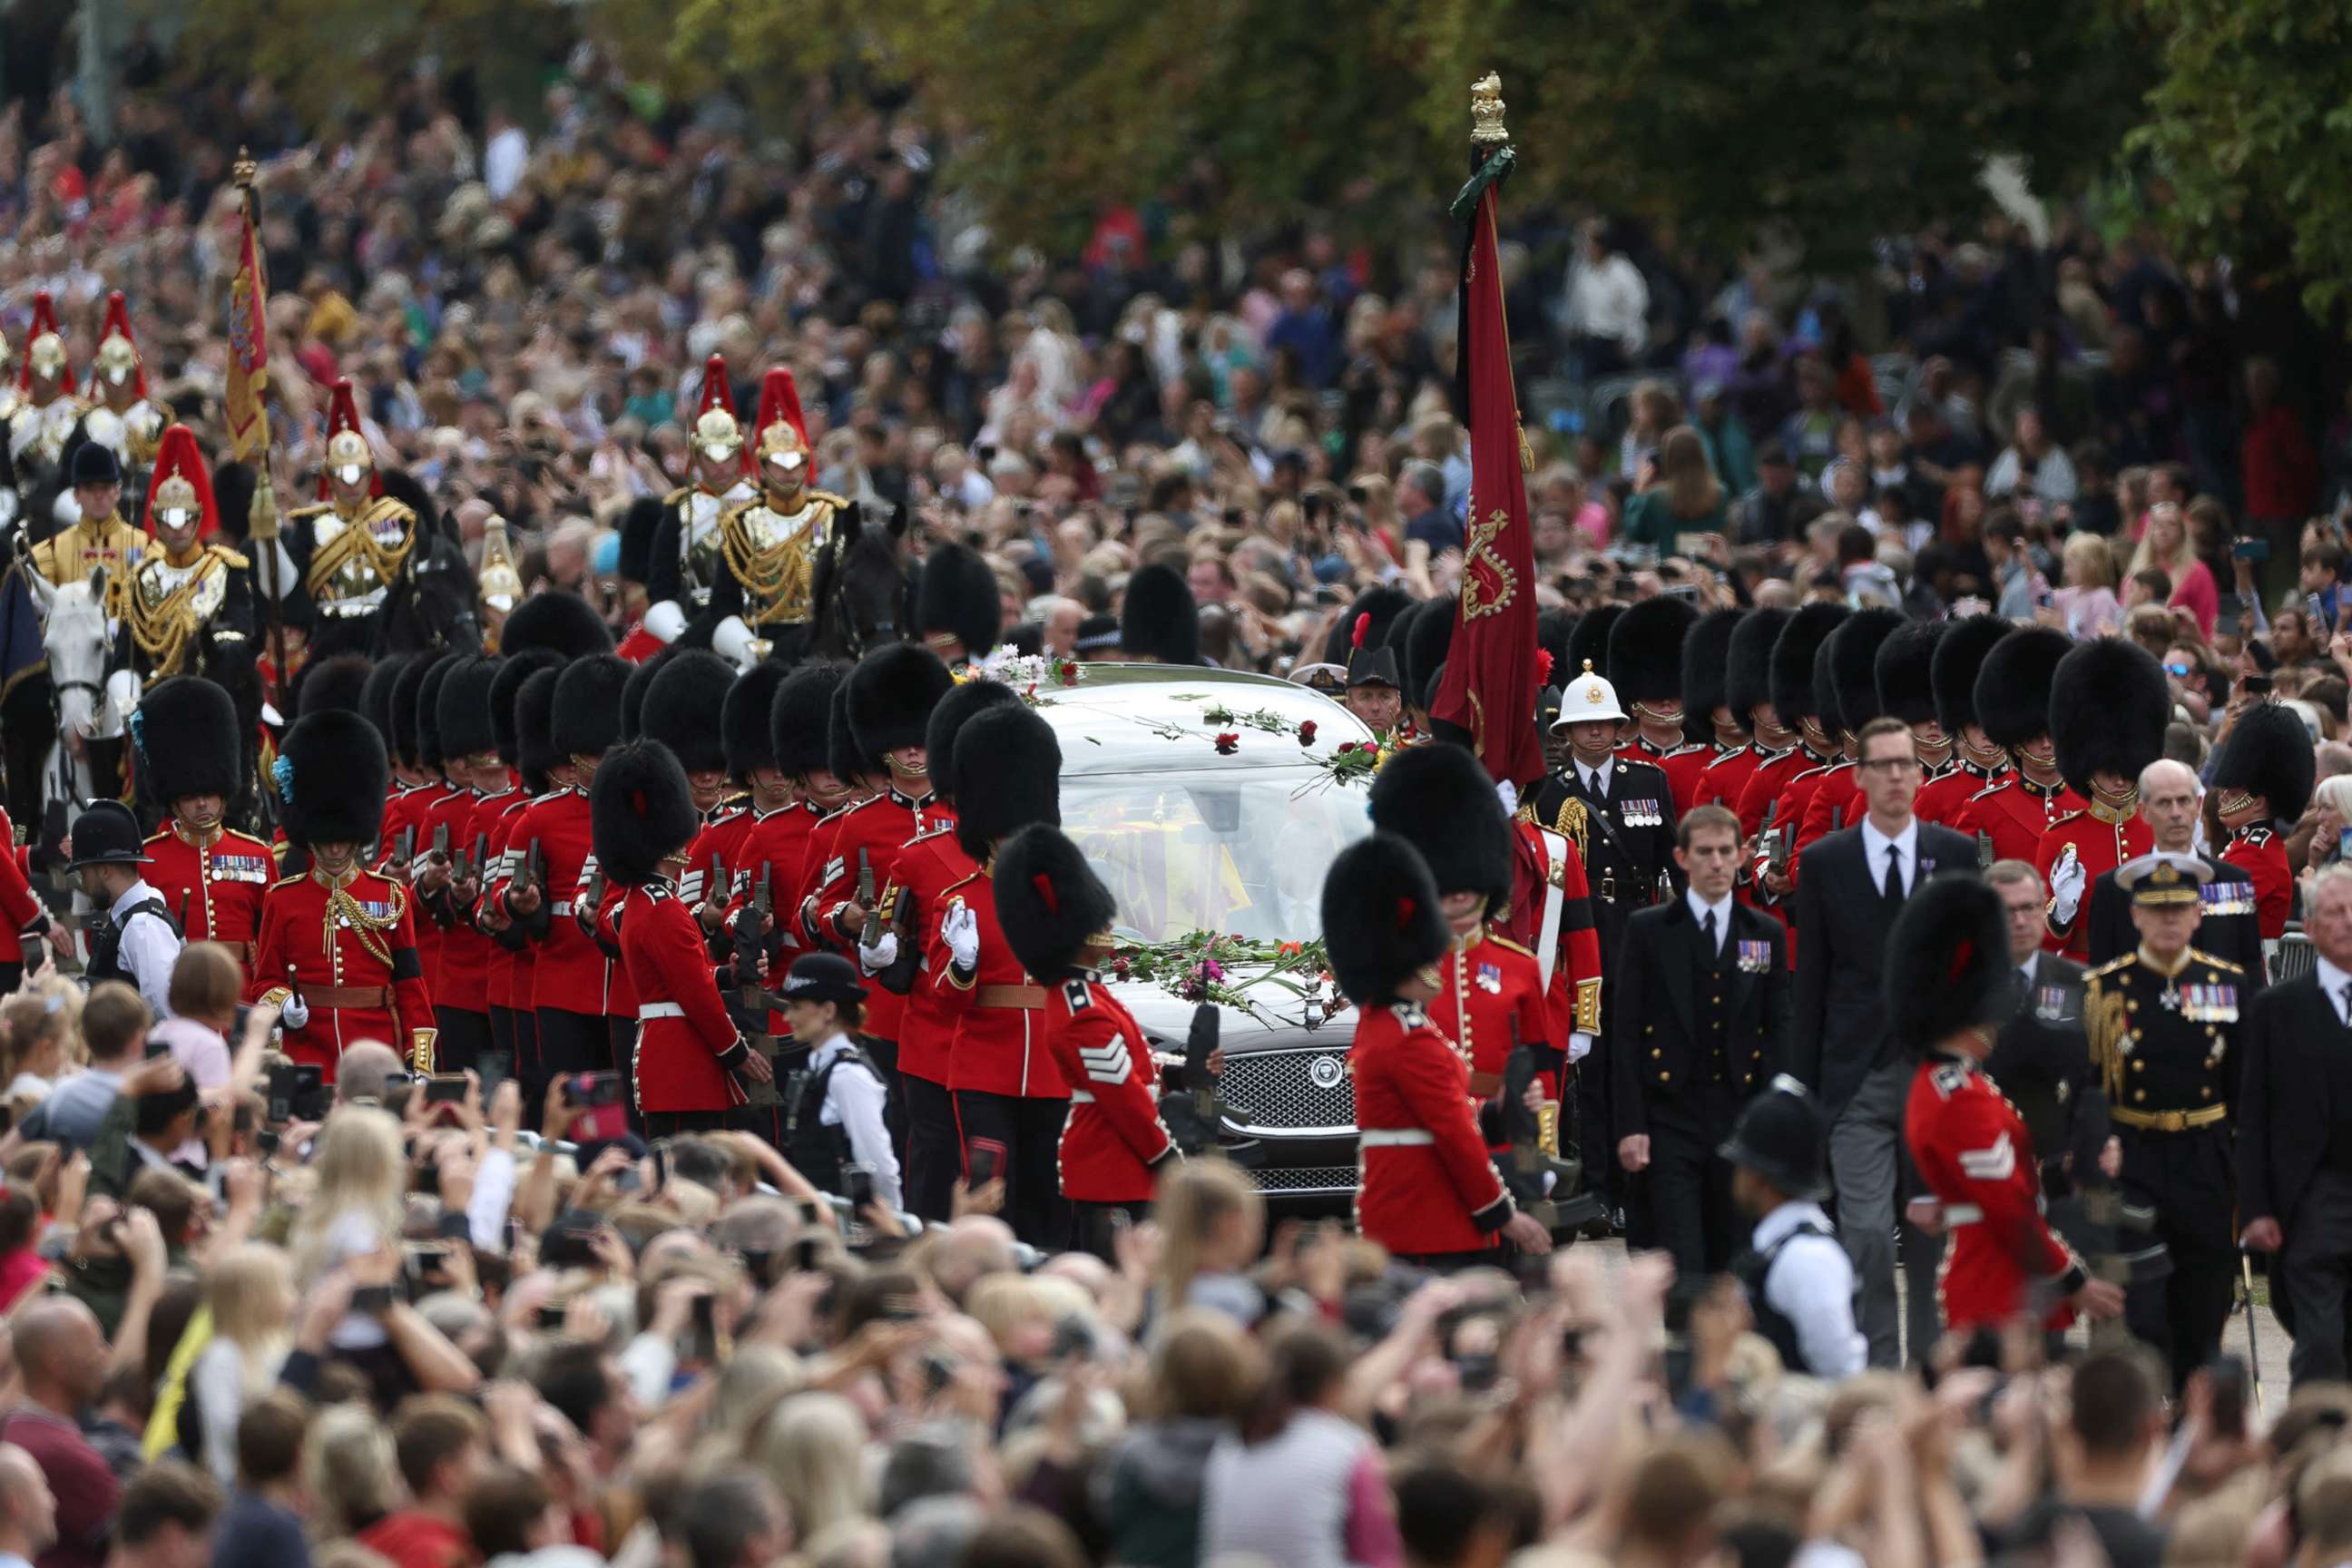 PHOTO: The hearse travels along the Long Walk as it makes its way to Windsor Castle, on the day of the state funeral and burial of Britain's Queen Elizabeth, in Windsor, Britain, Sept. 19, 2022.